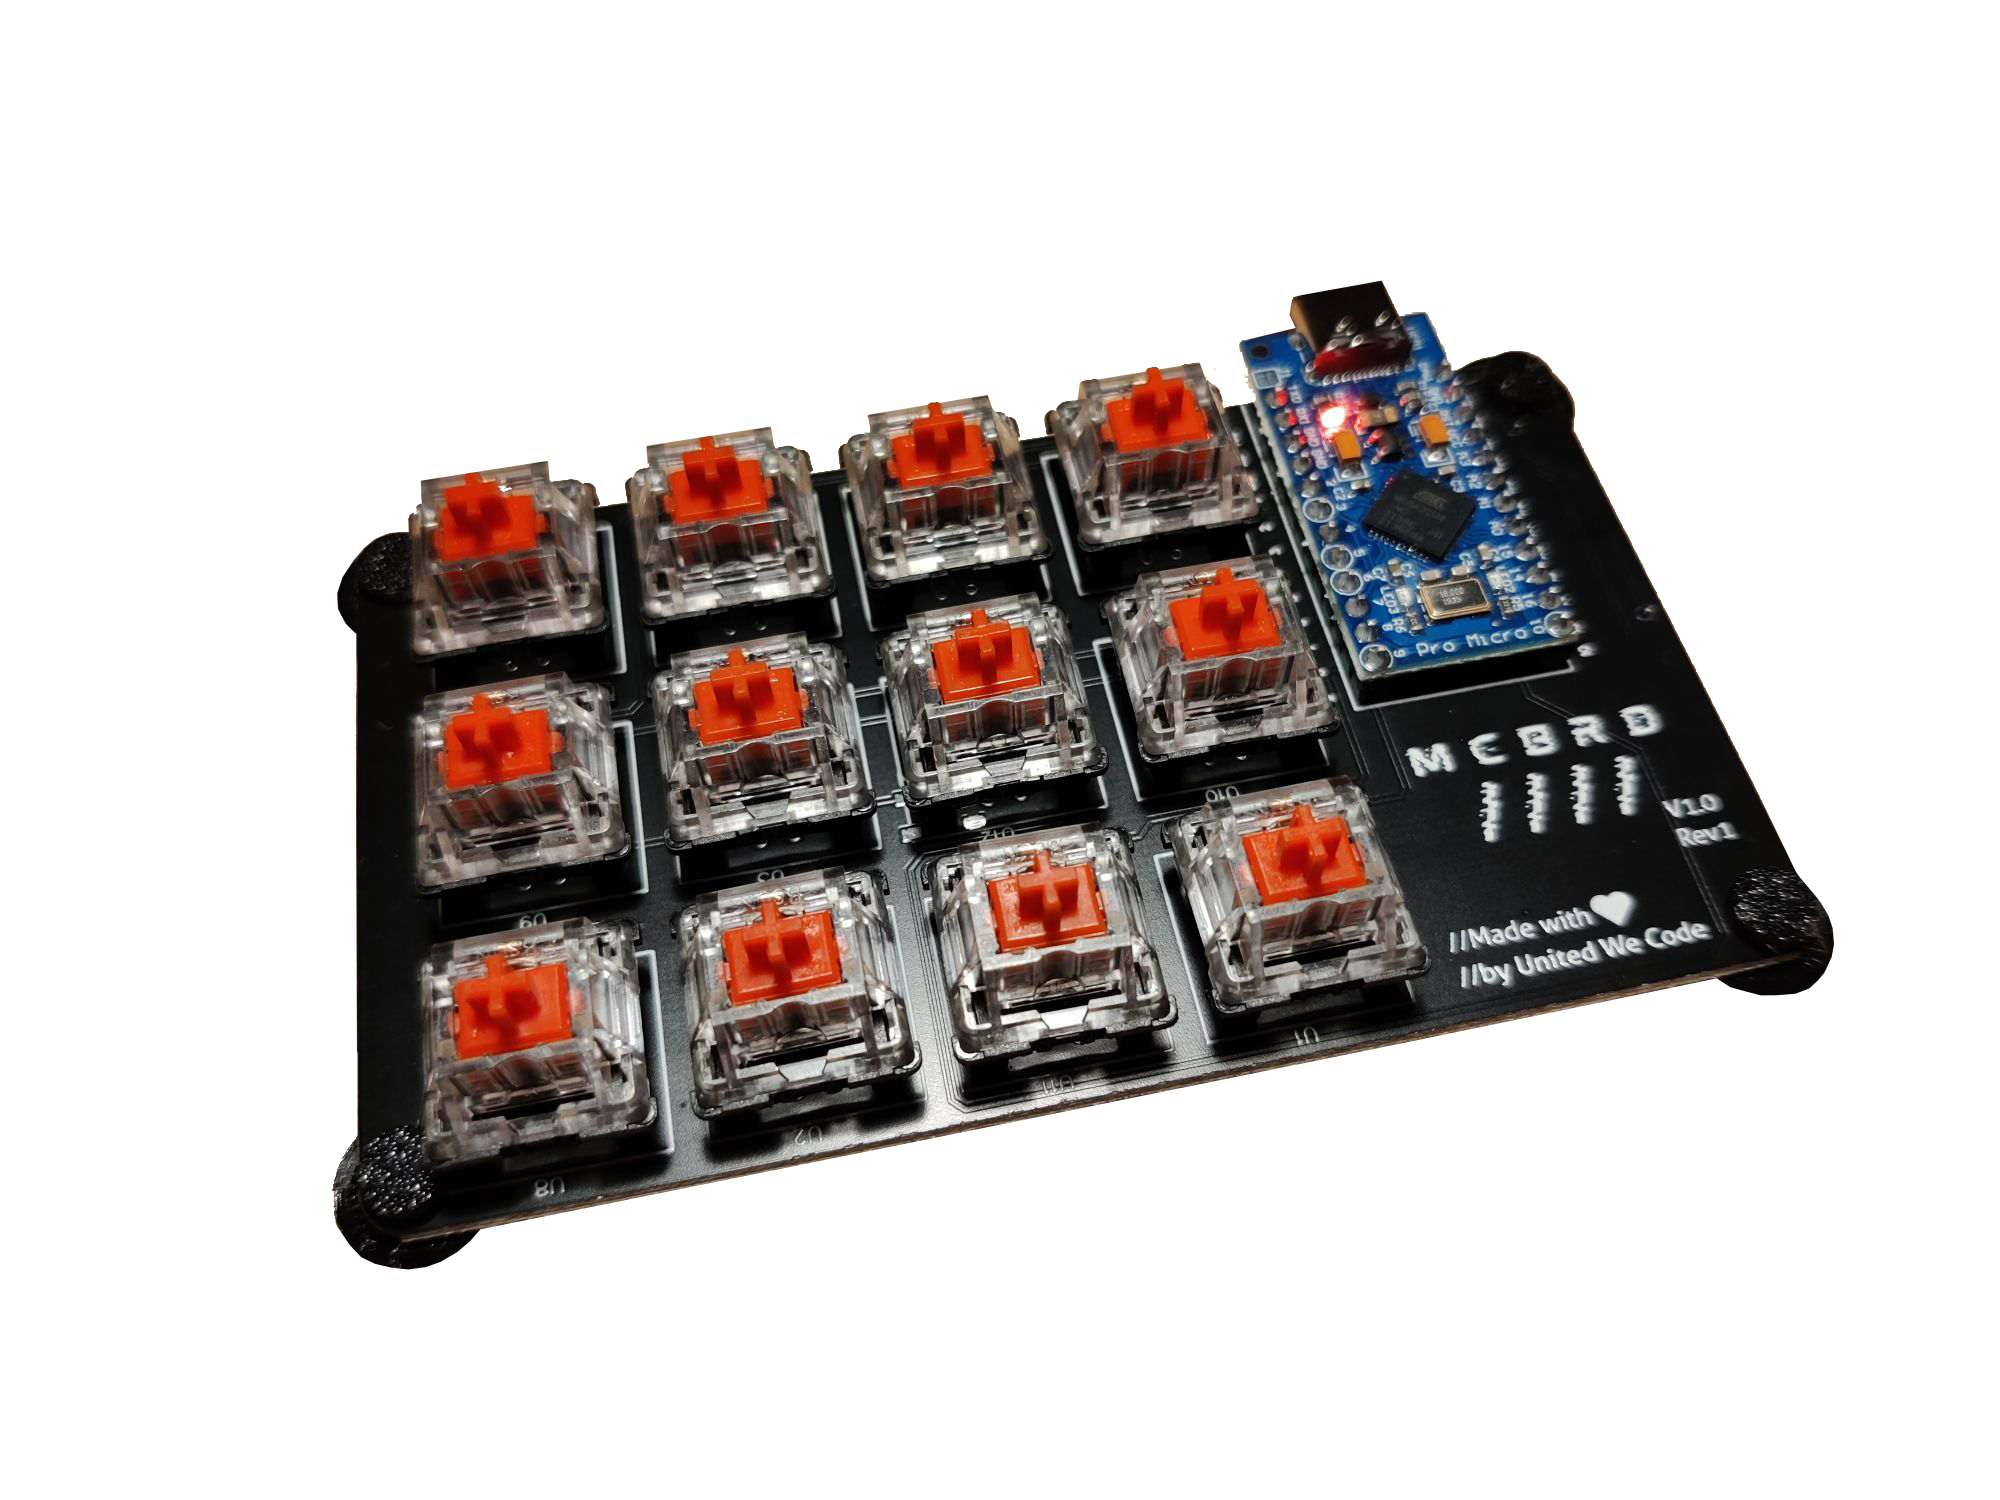 A transparent picture of the board - front side